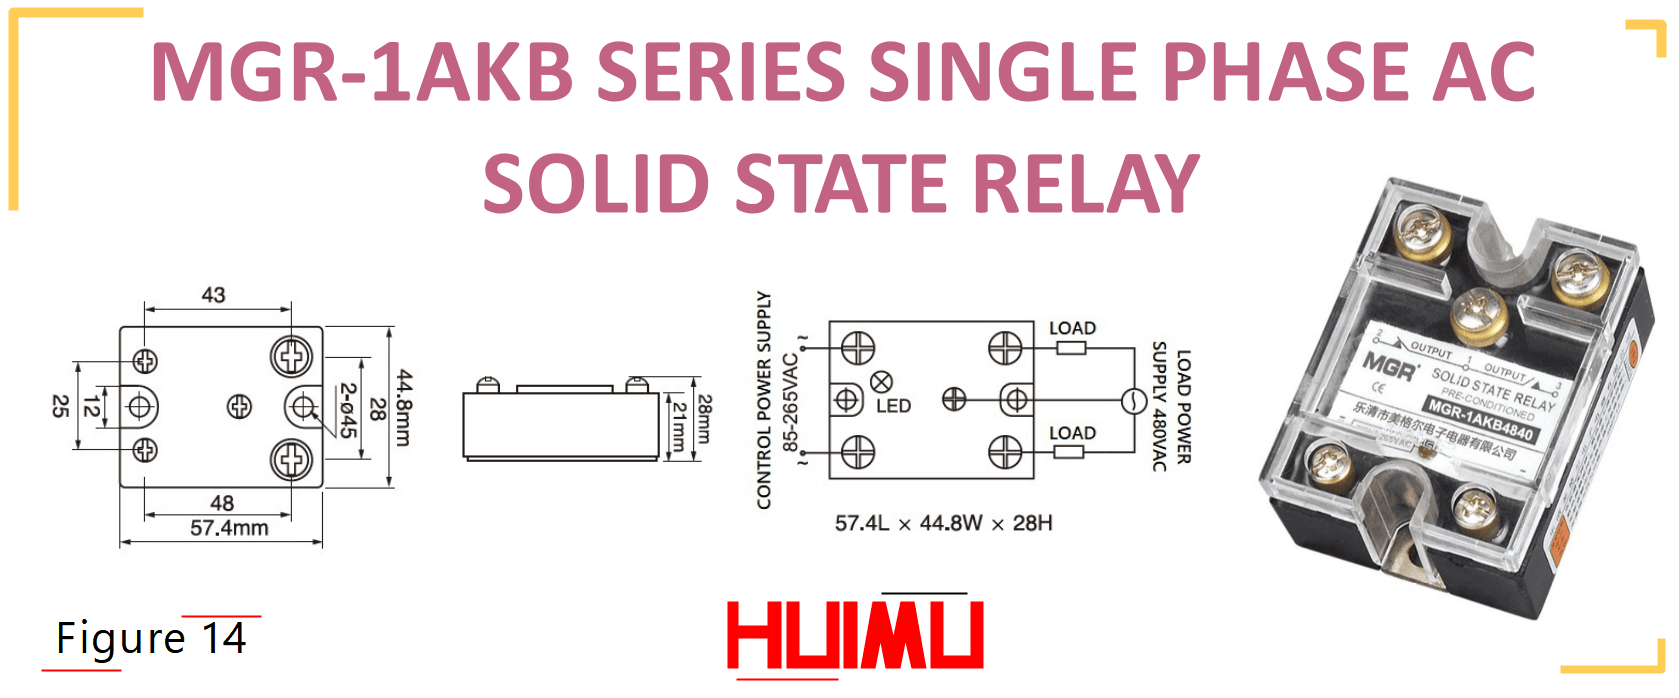 MGR-1AKB SERIES SINGLE PHASE AC SOLID STATE RELAY